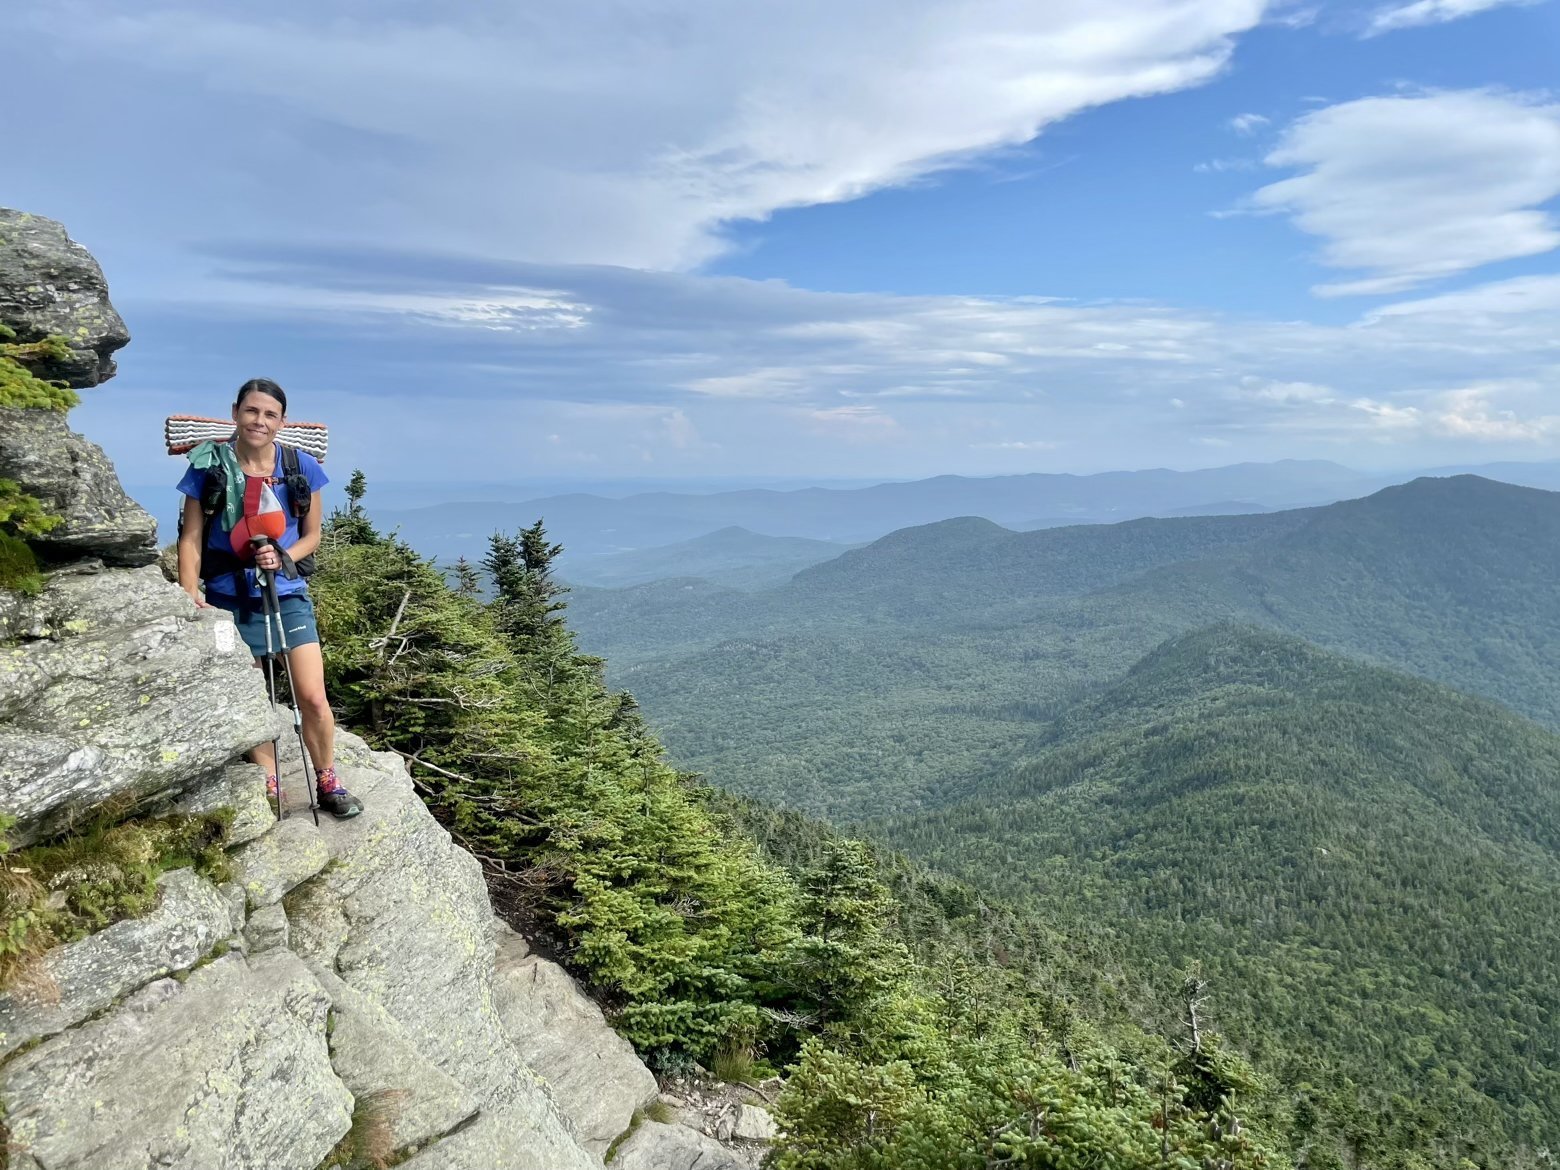 Rounding a ledge near the summit of Camel’s Hump